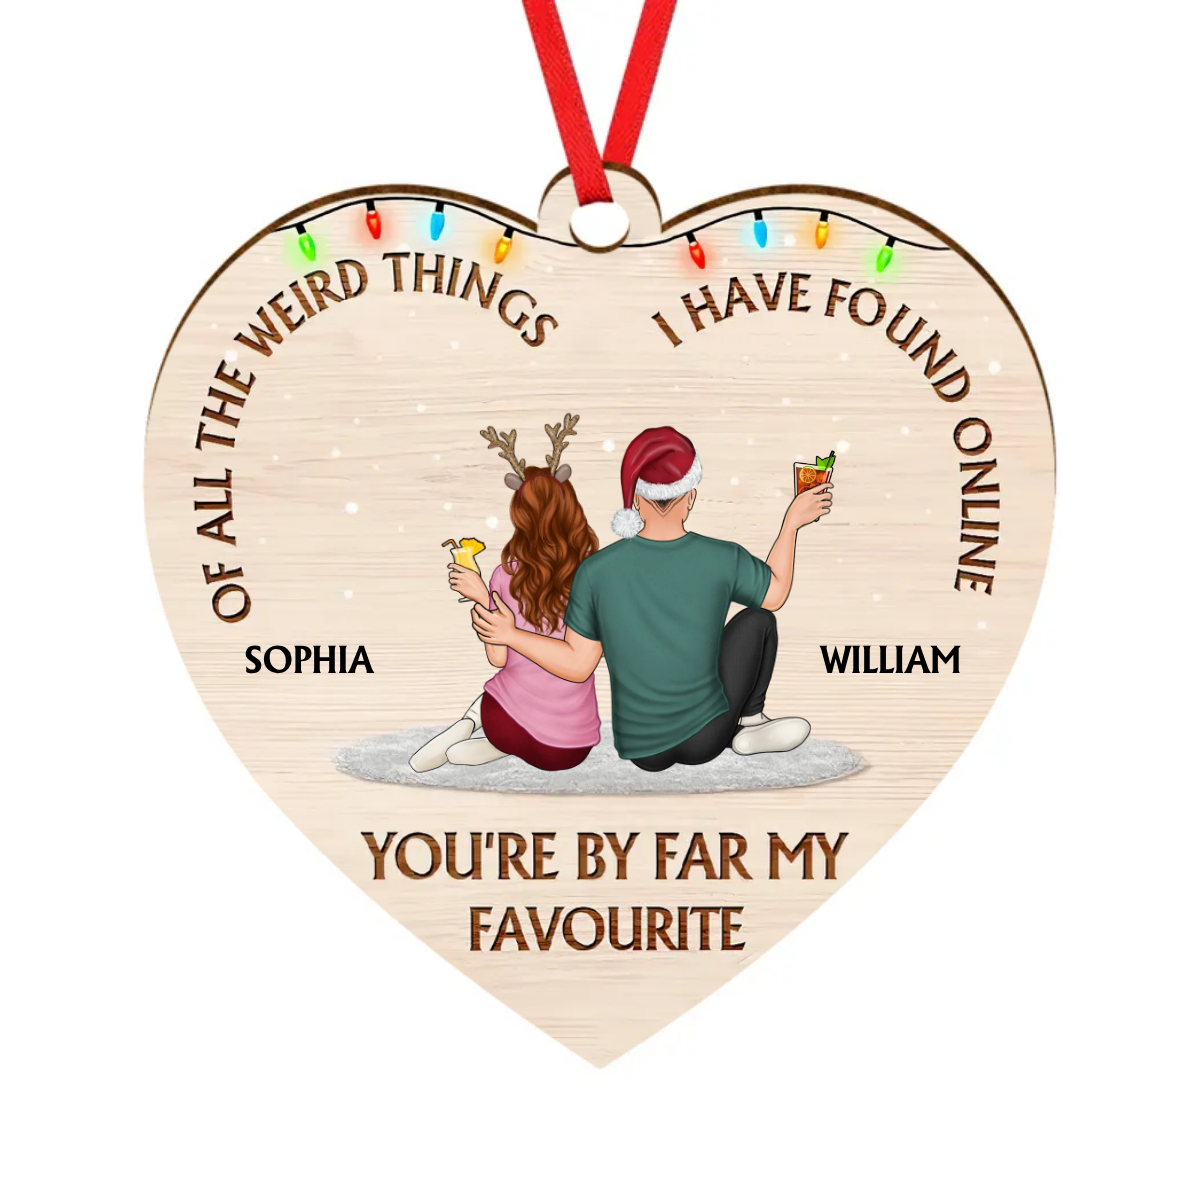 Of All The Weird Things - Christmas Gift For Couples, Husband, Wife - Personalized Custom Wooden Ornament